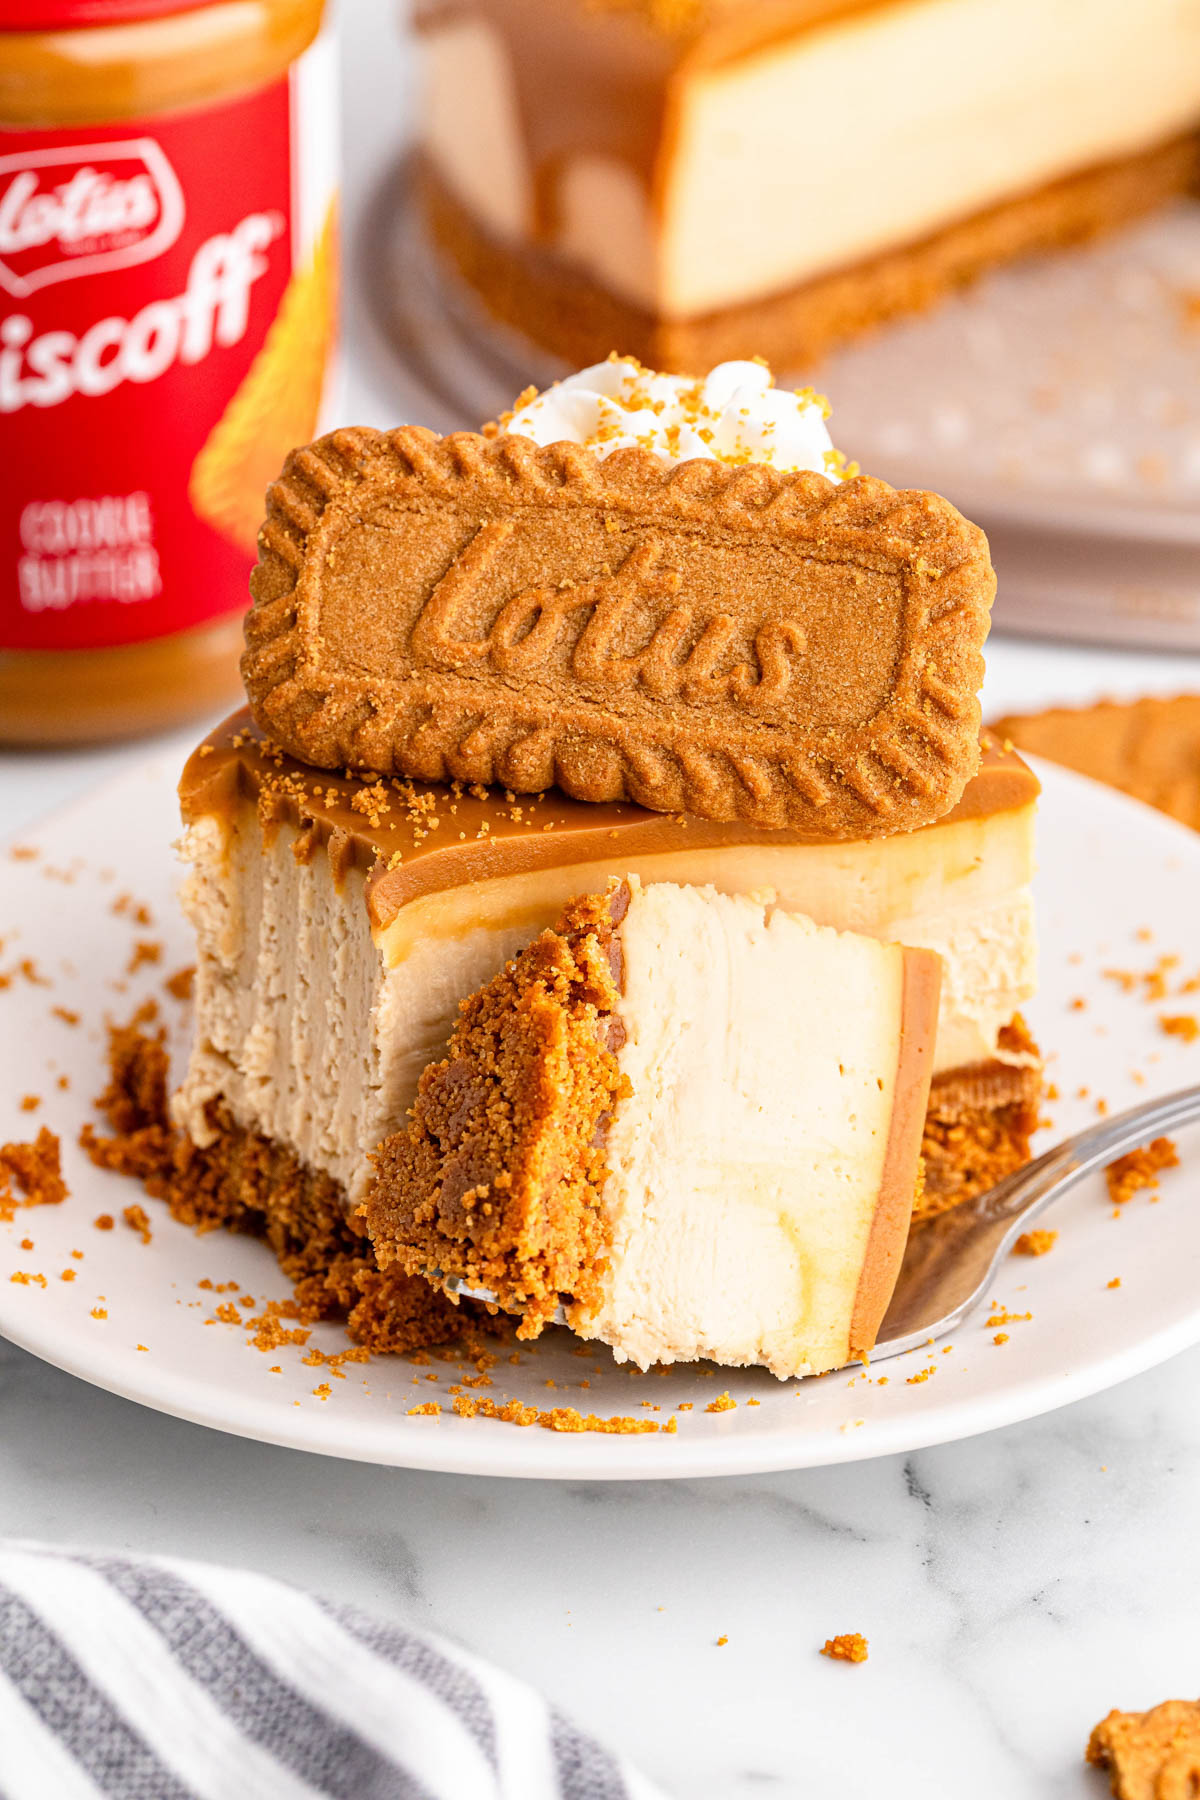 A piece of Biscoff cheesecake on a plate.